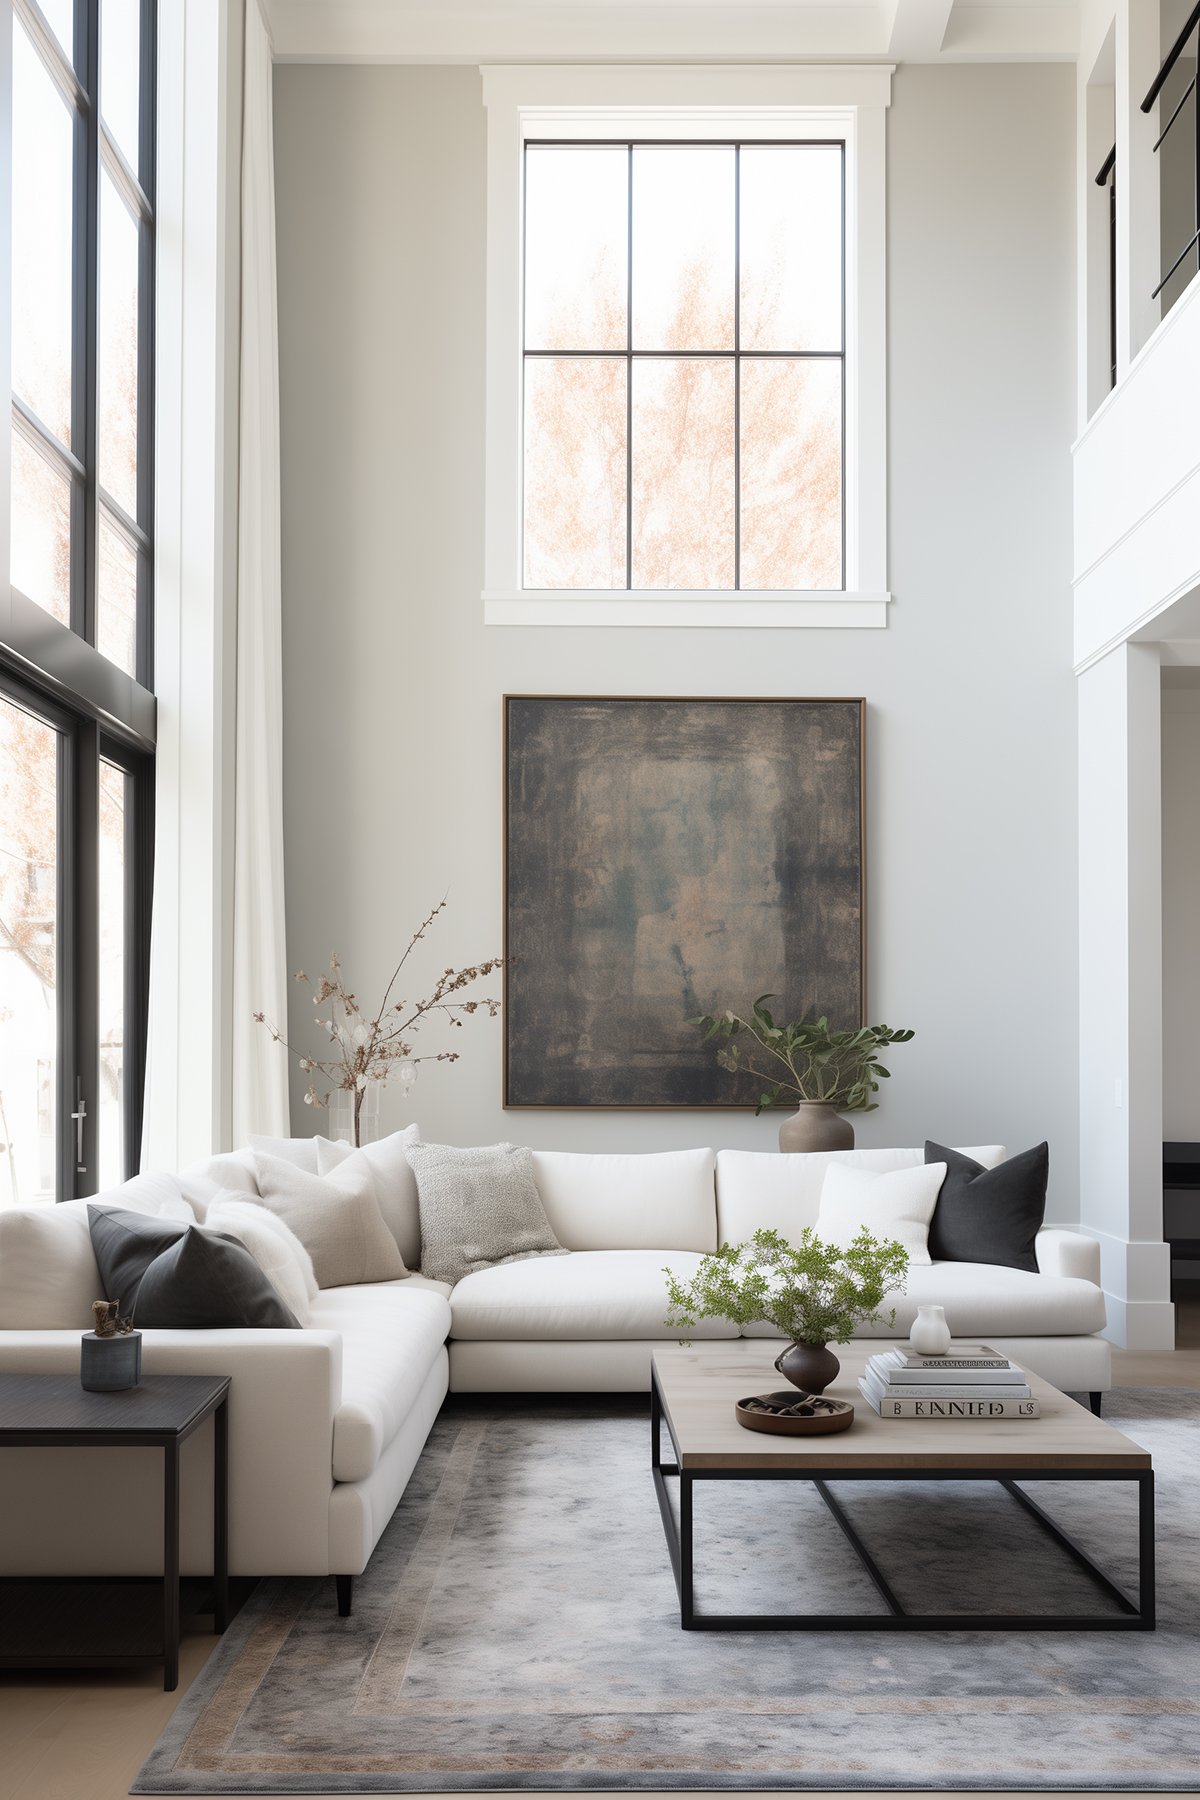 A spacious living room painted with Sherwin Williams City Loft, featuring tall windows, a white sectional sofa, dark framed art, and a modern coffee table.